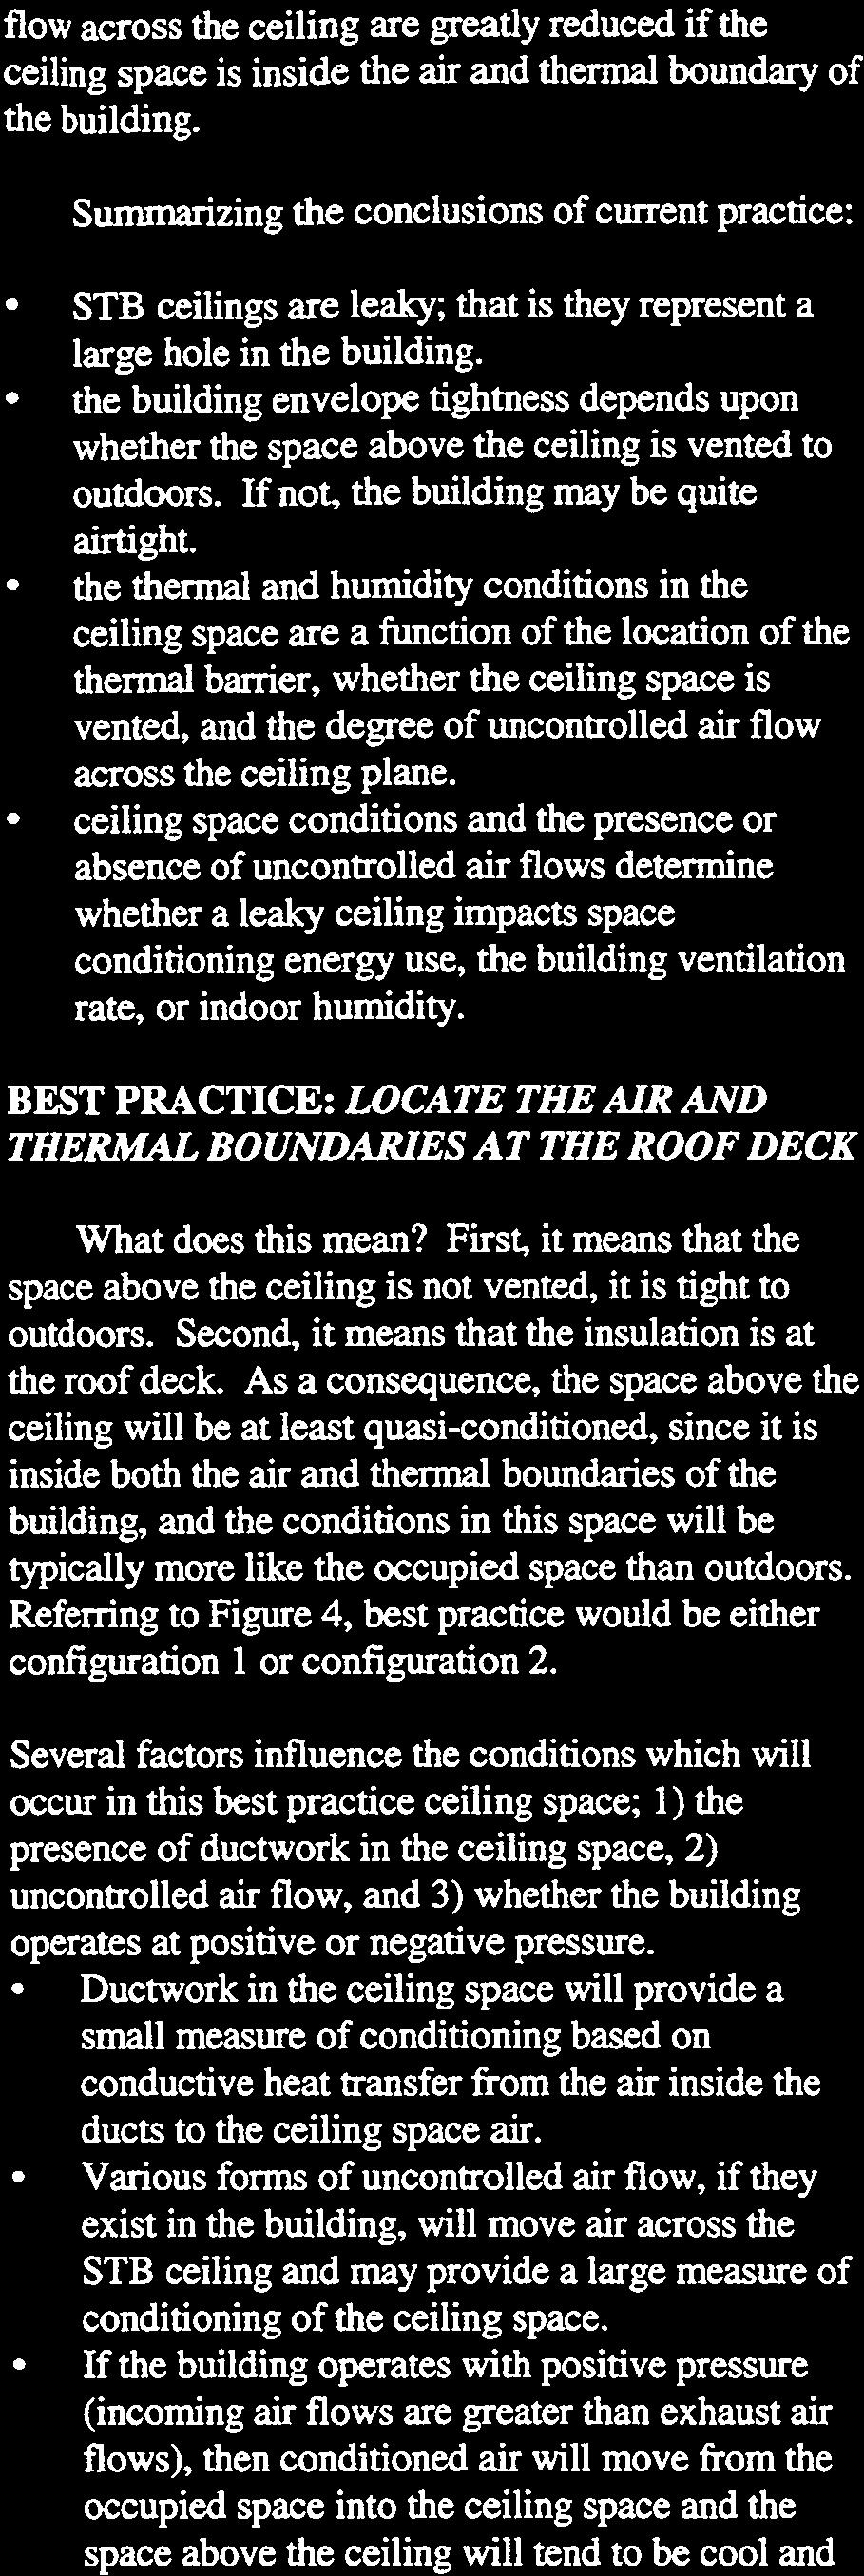 the building envelope tightness depends upon whether the space above the ceiling is vented to outdoors. If not, the building may be quite airtight.